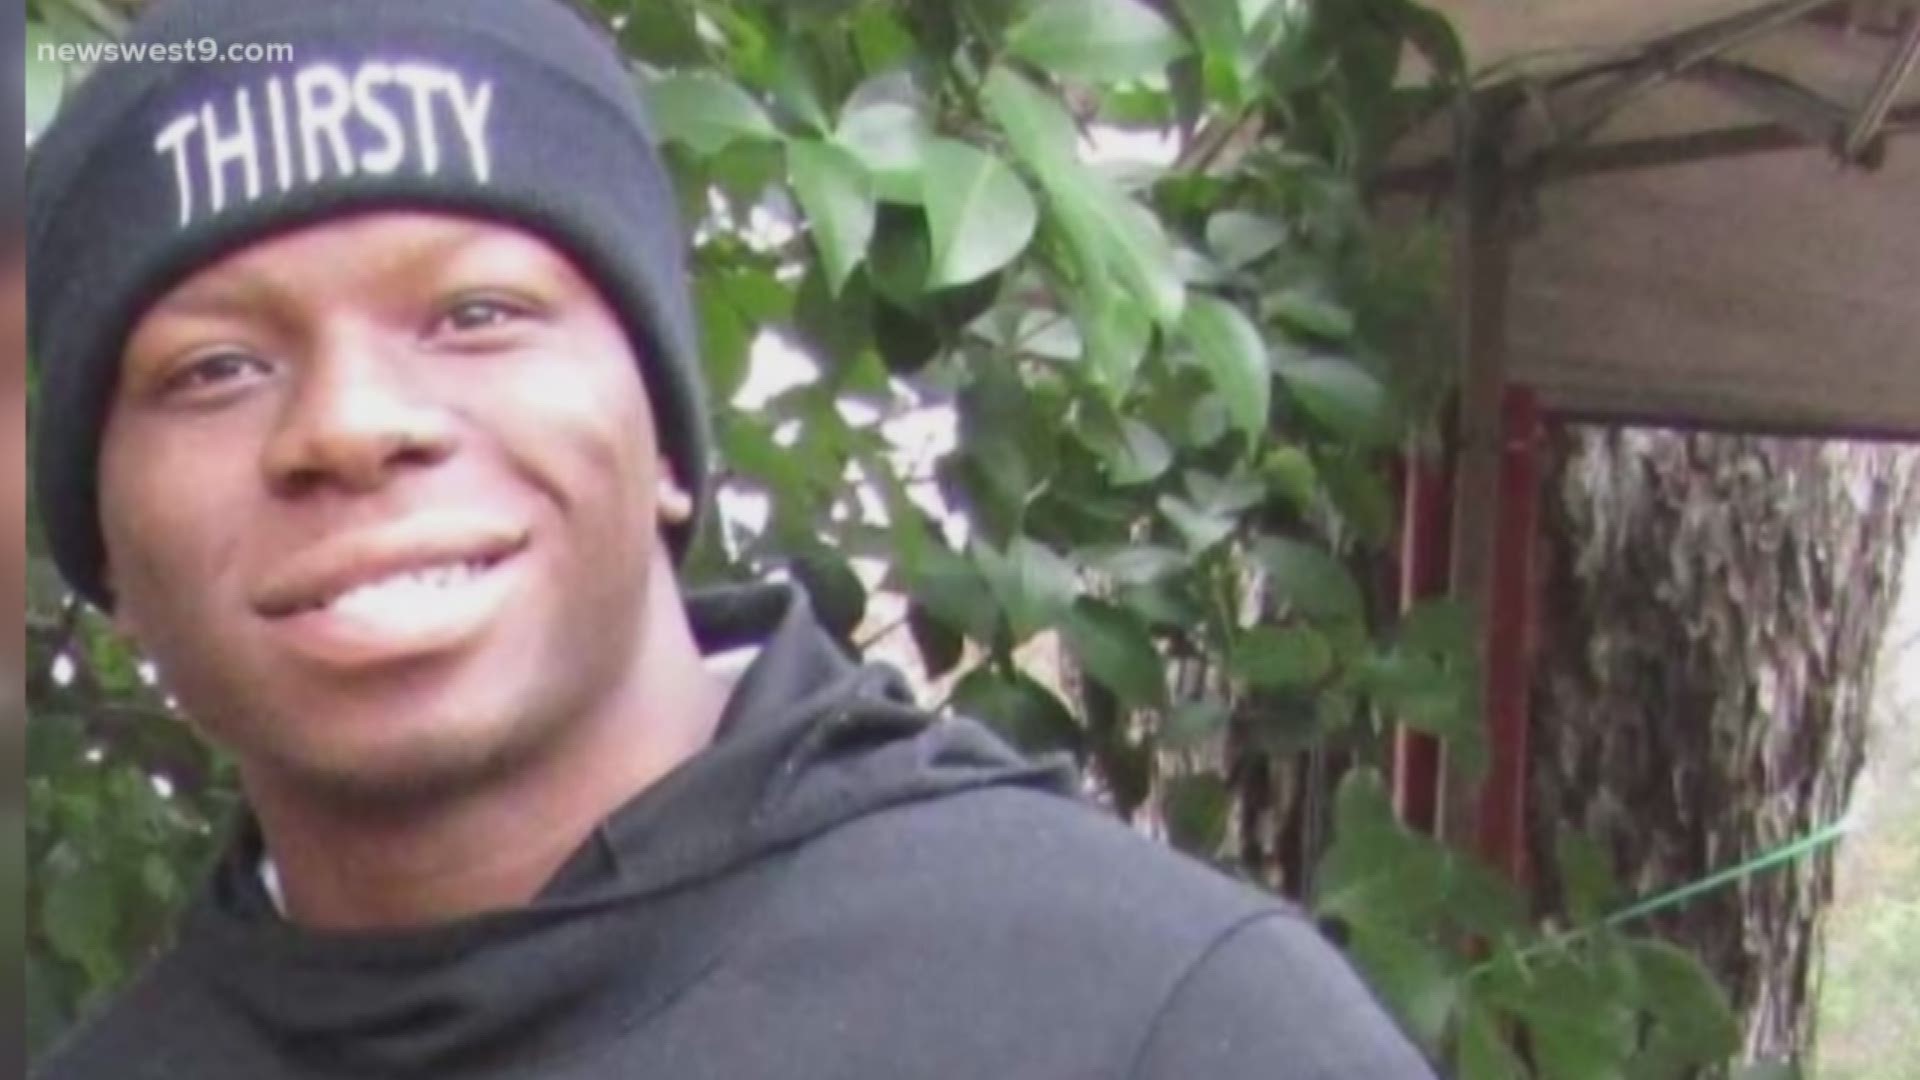 Kameron Brown is one of the seven victims who were shot and killed in Odessa’s mass shooting.